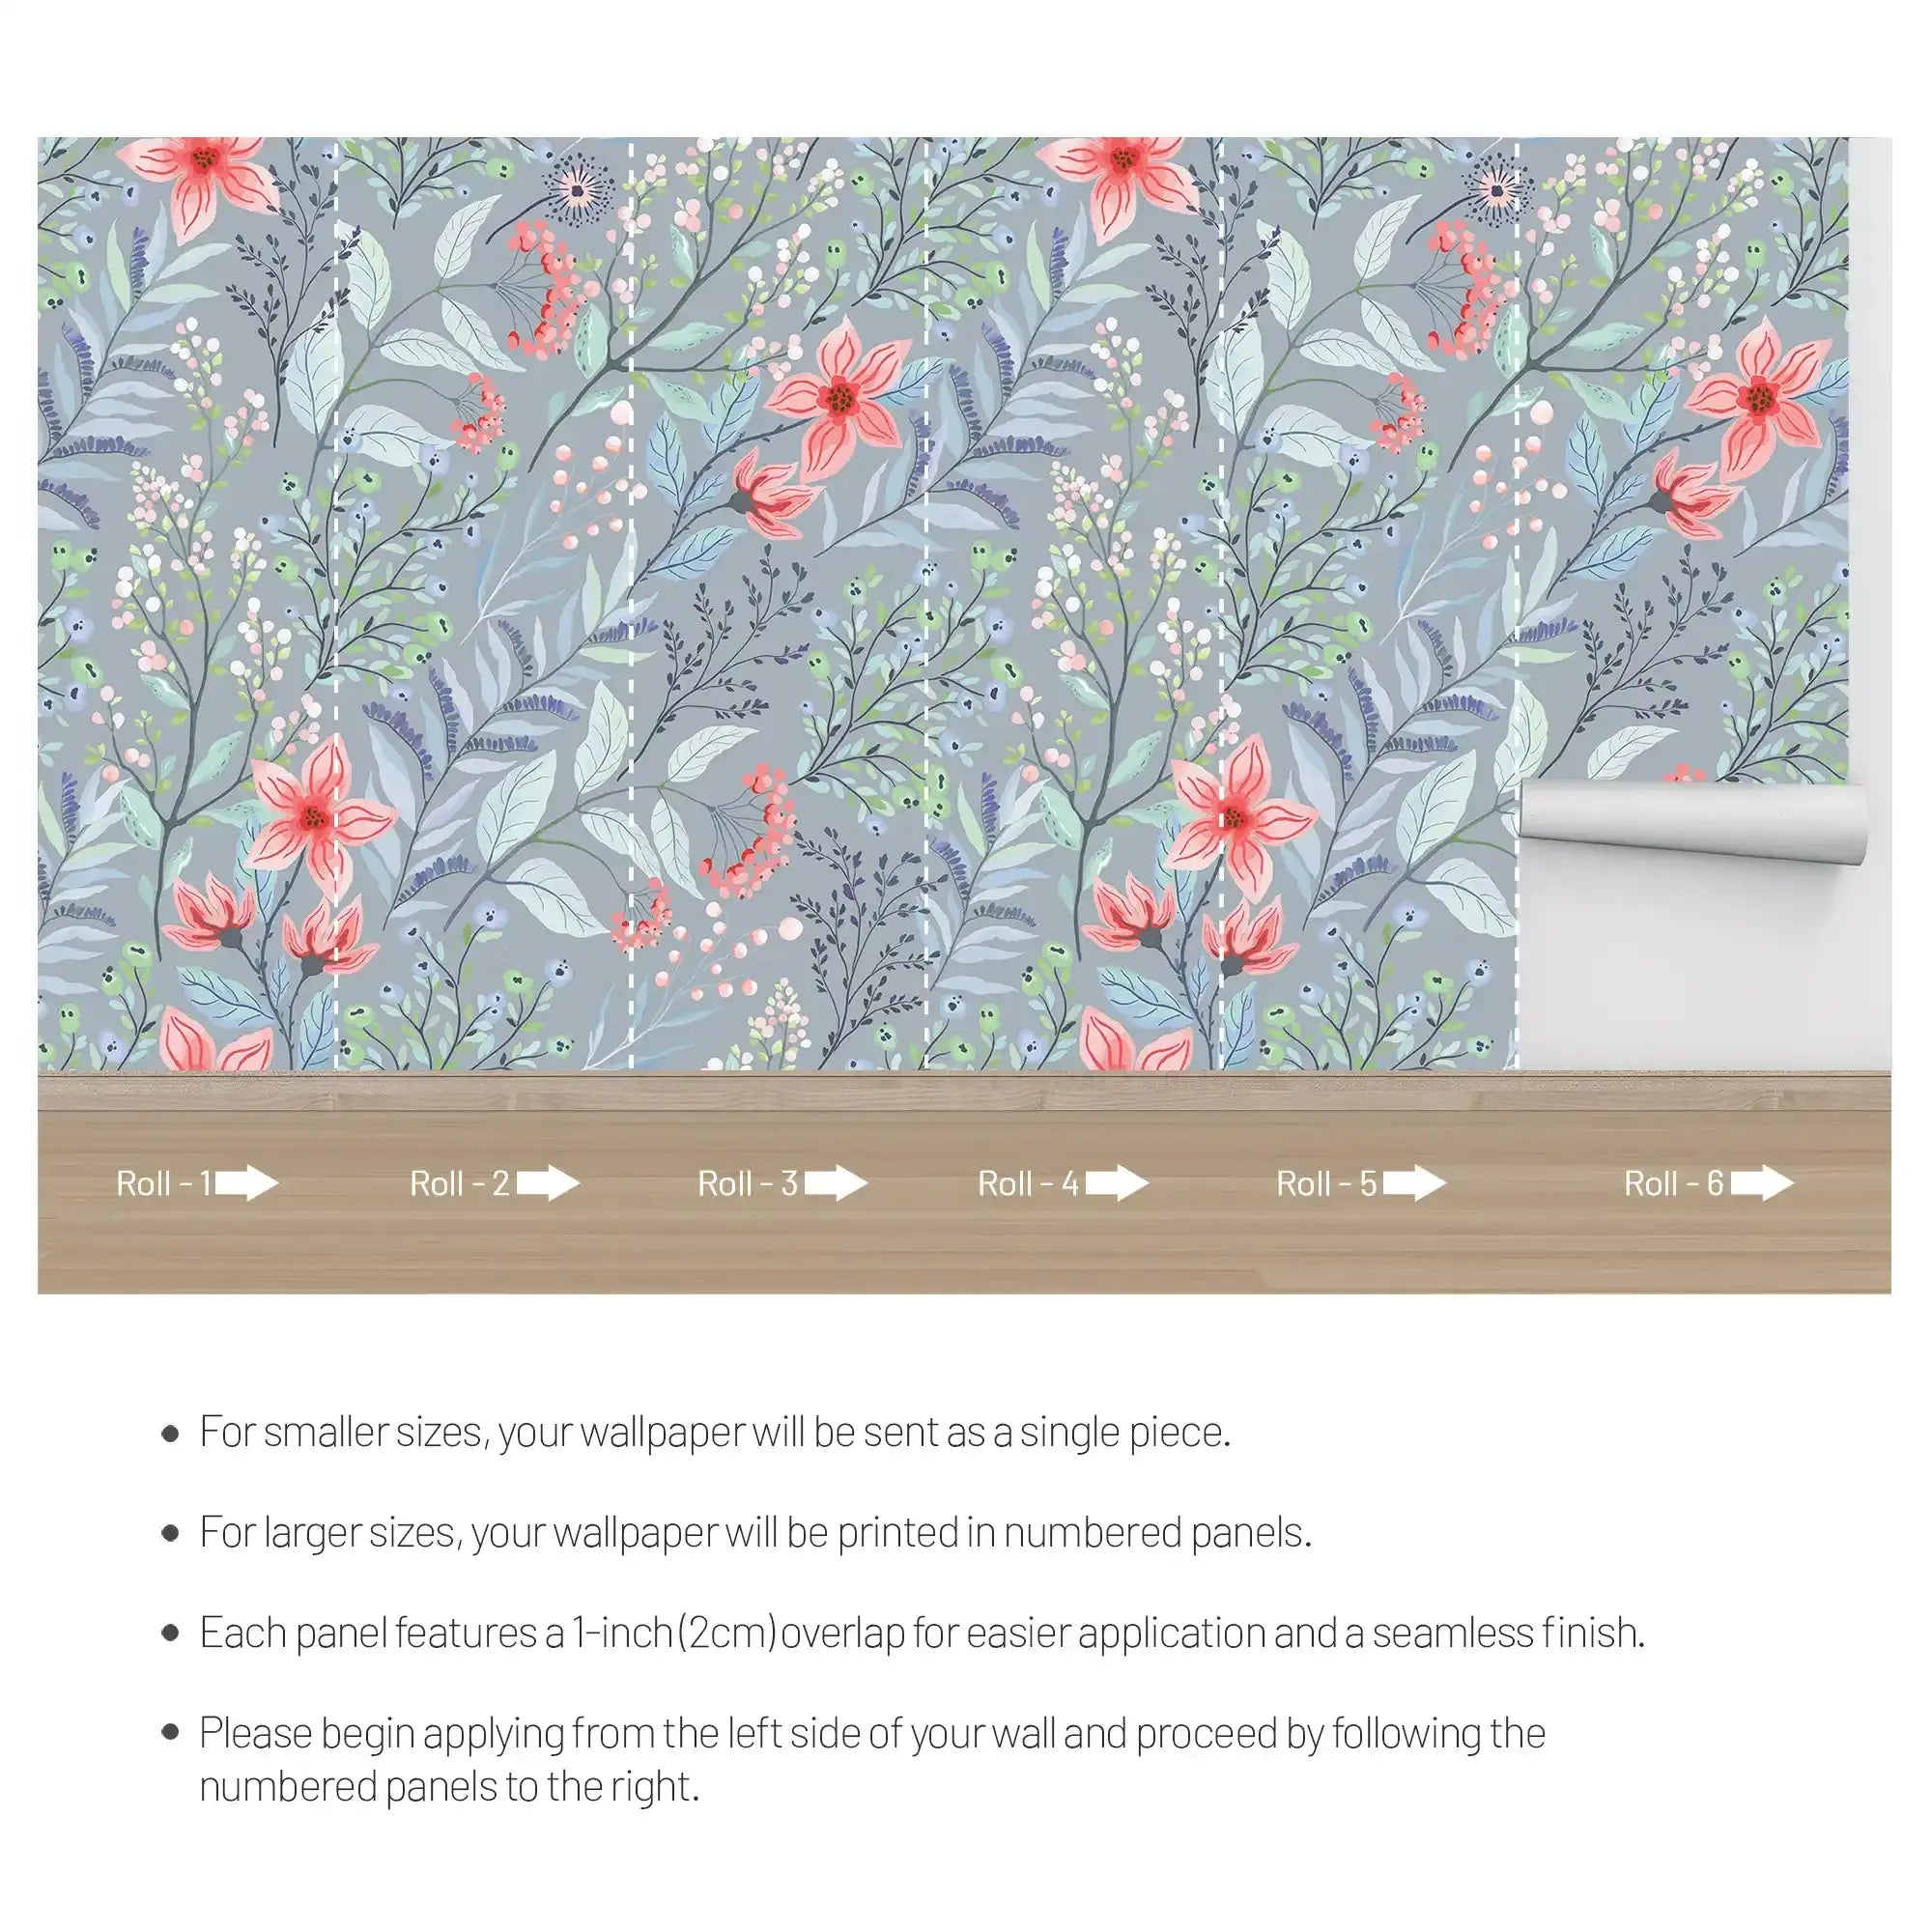 3105-B / Peel and Stick Floral Wallpaper: Pink Flowers and Leaf Design, Easy Apply Wall Decor for Bedroom & Bathroom - Artevella